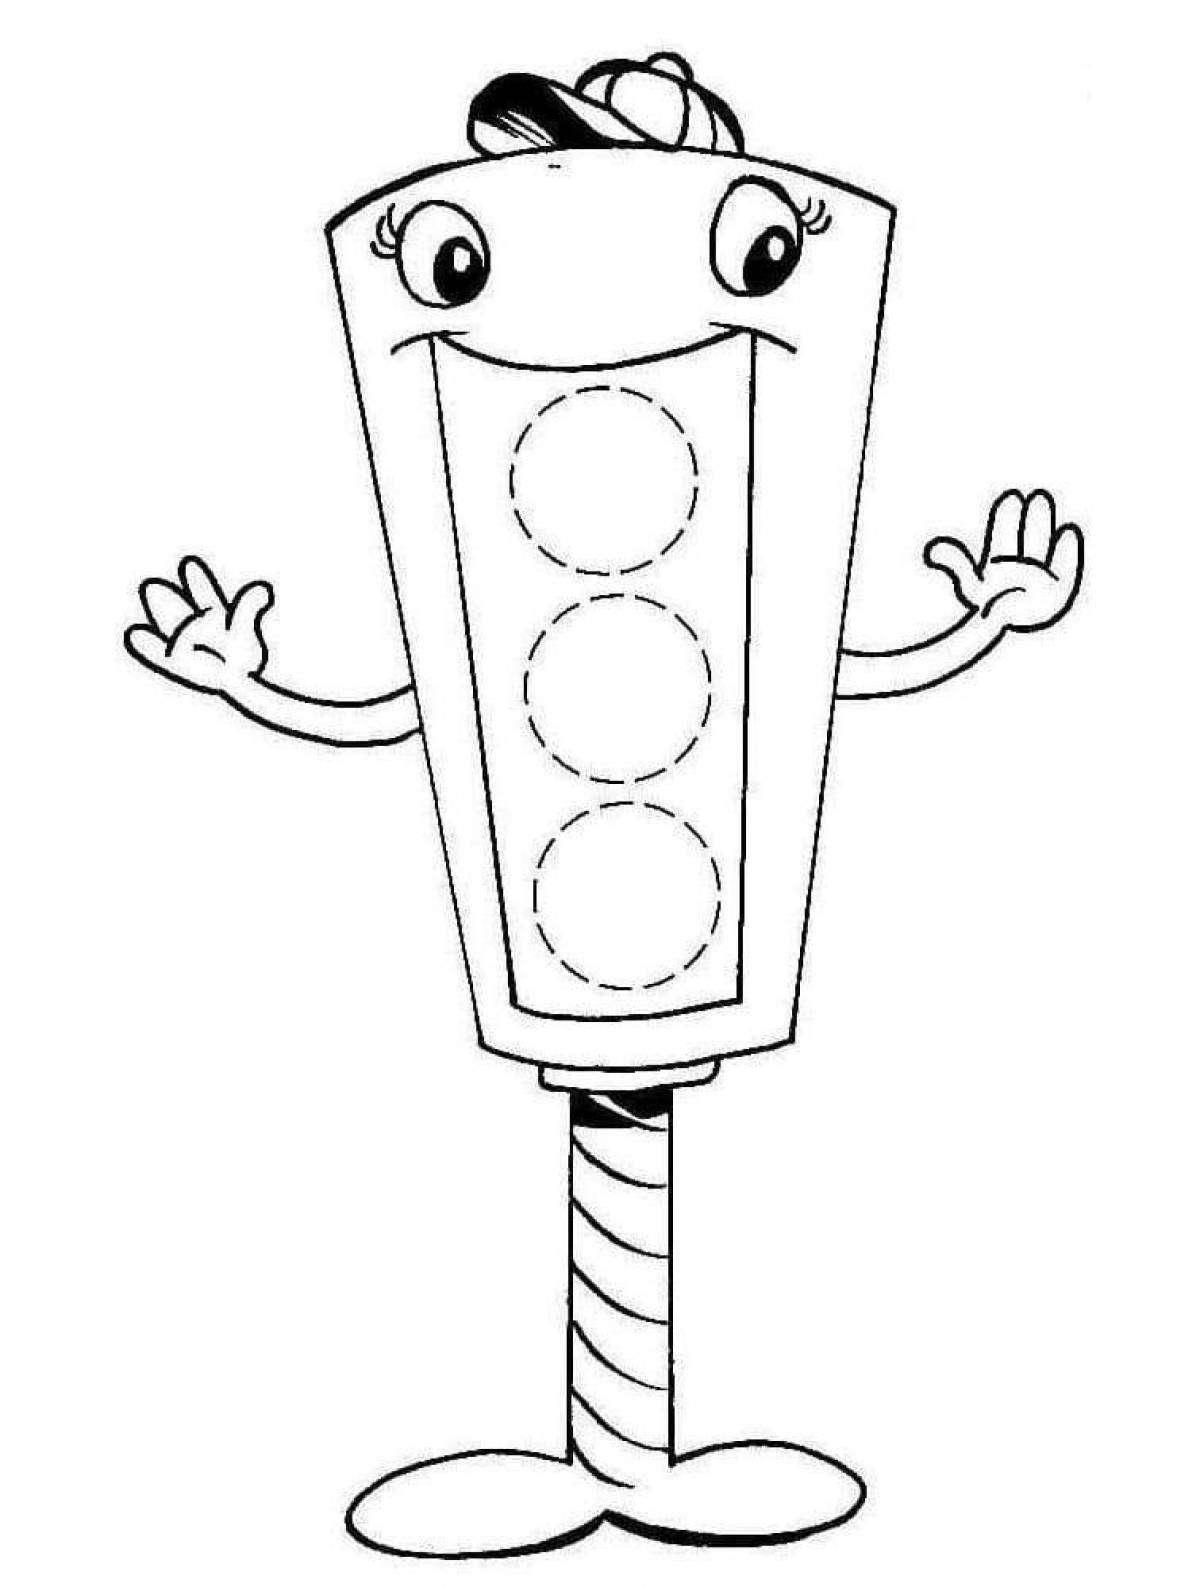 Attractive traffic light coloring book for preschoolers 2-3 years old